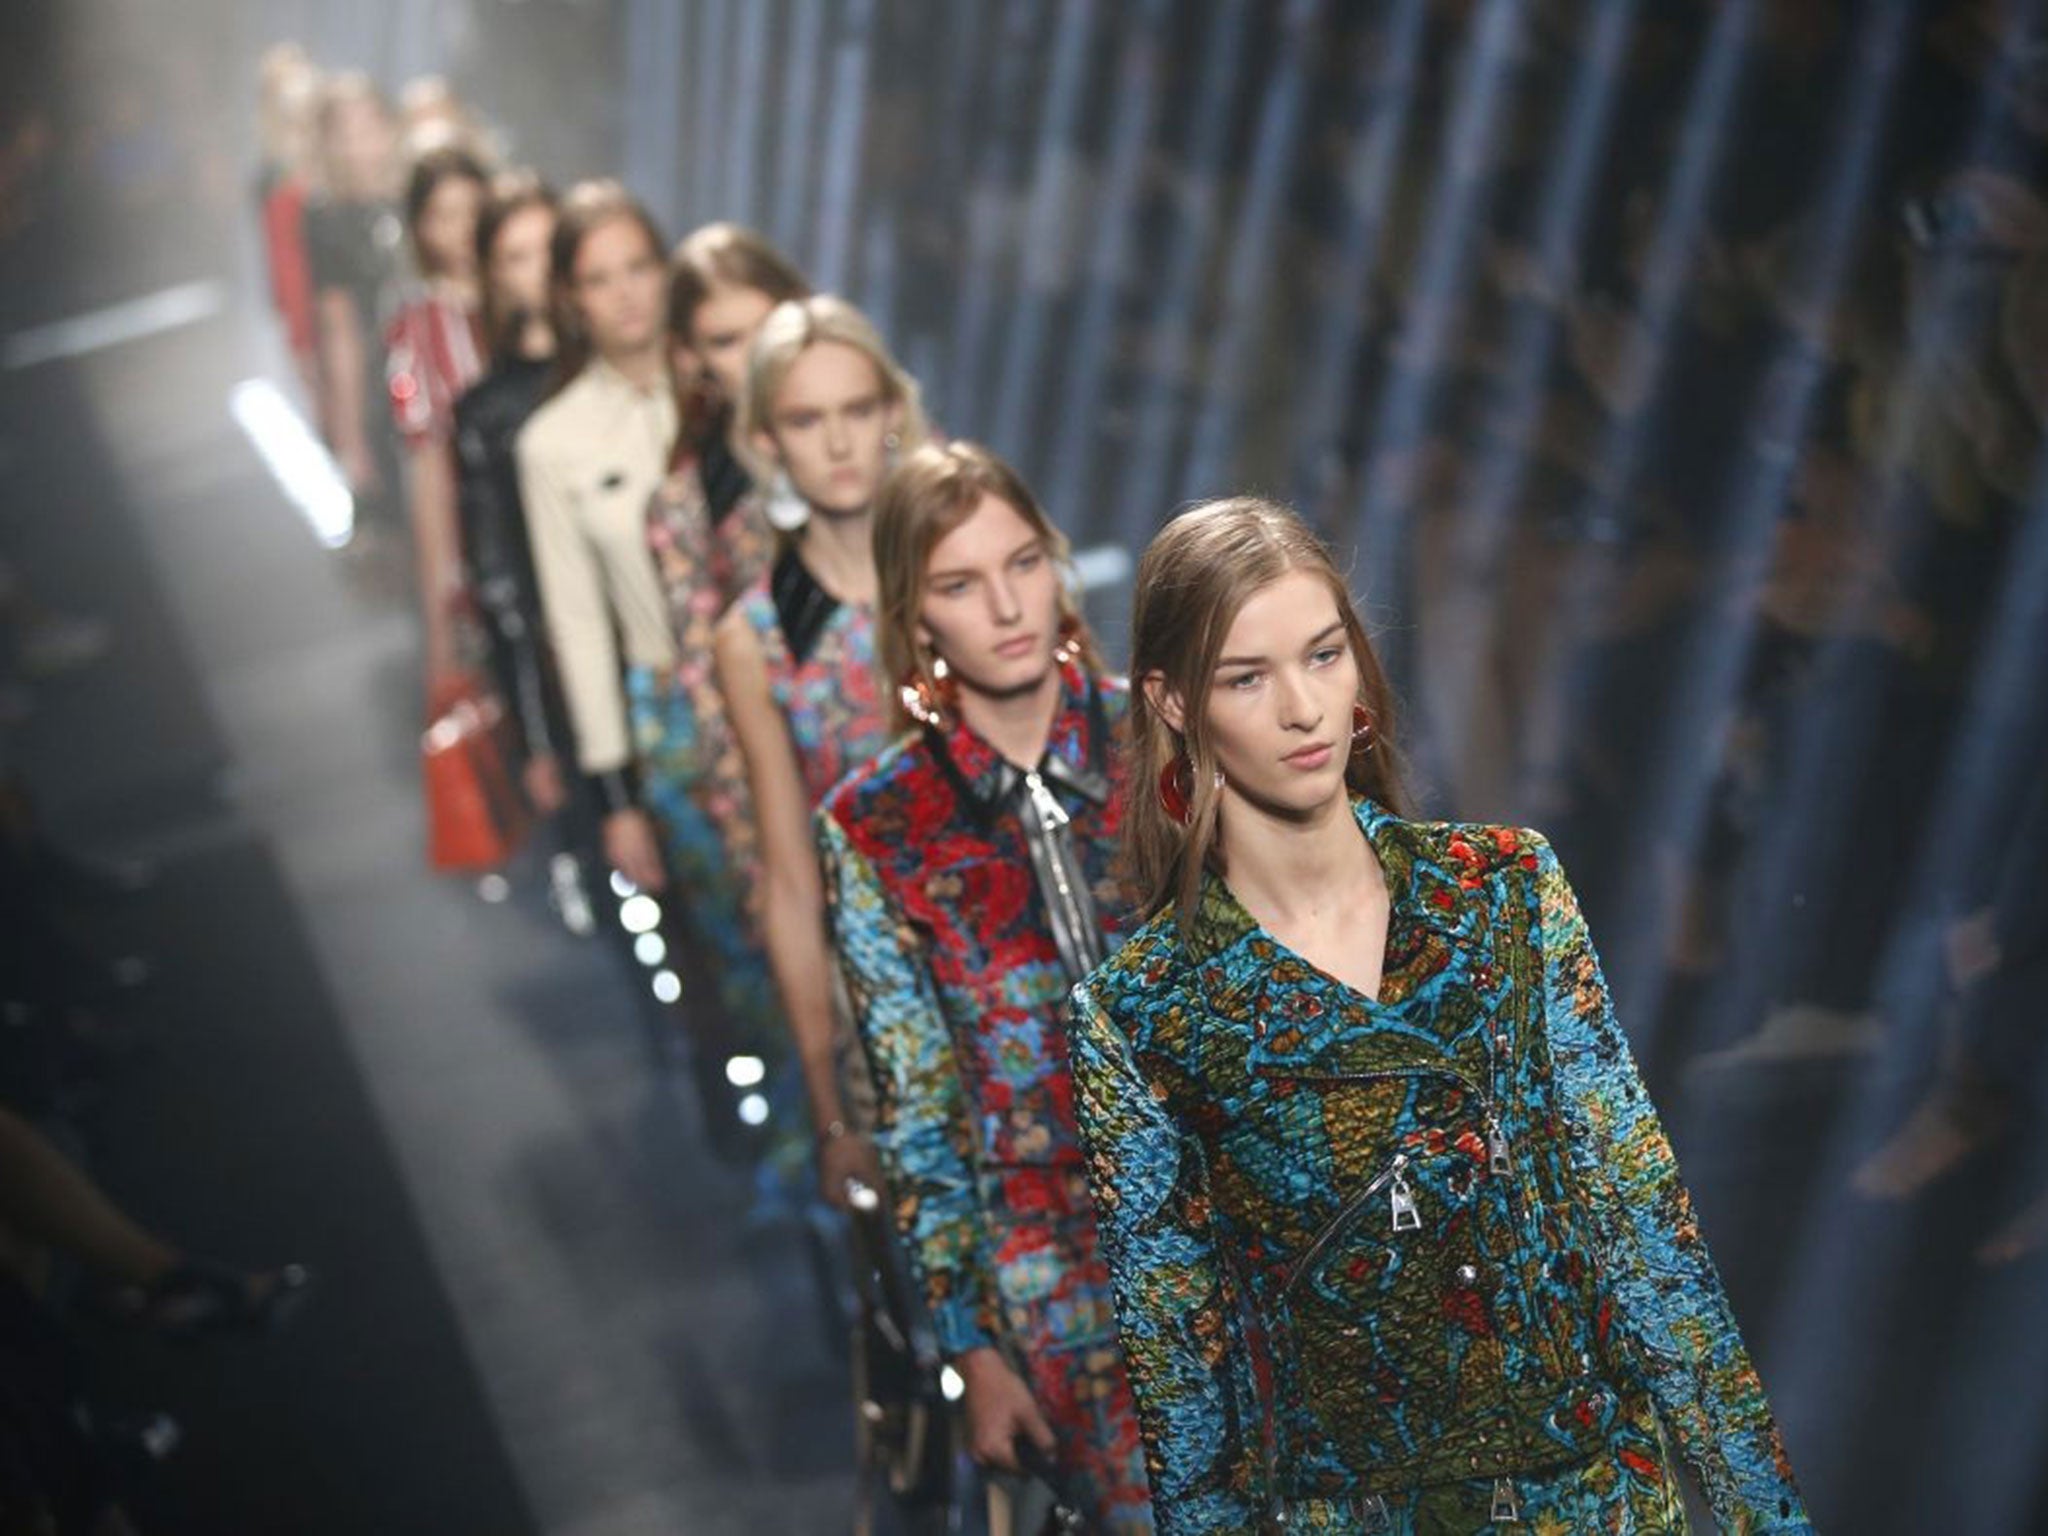 Louis Vuitton's SS 2015 Ready-to-wear collection decoded